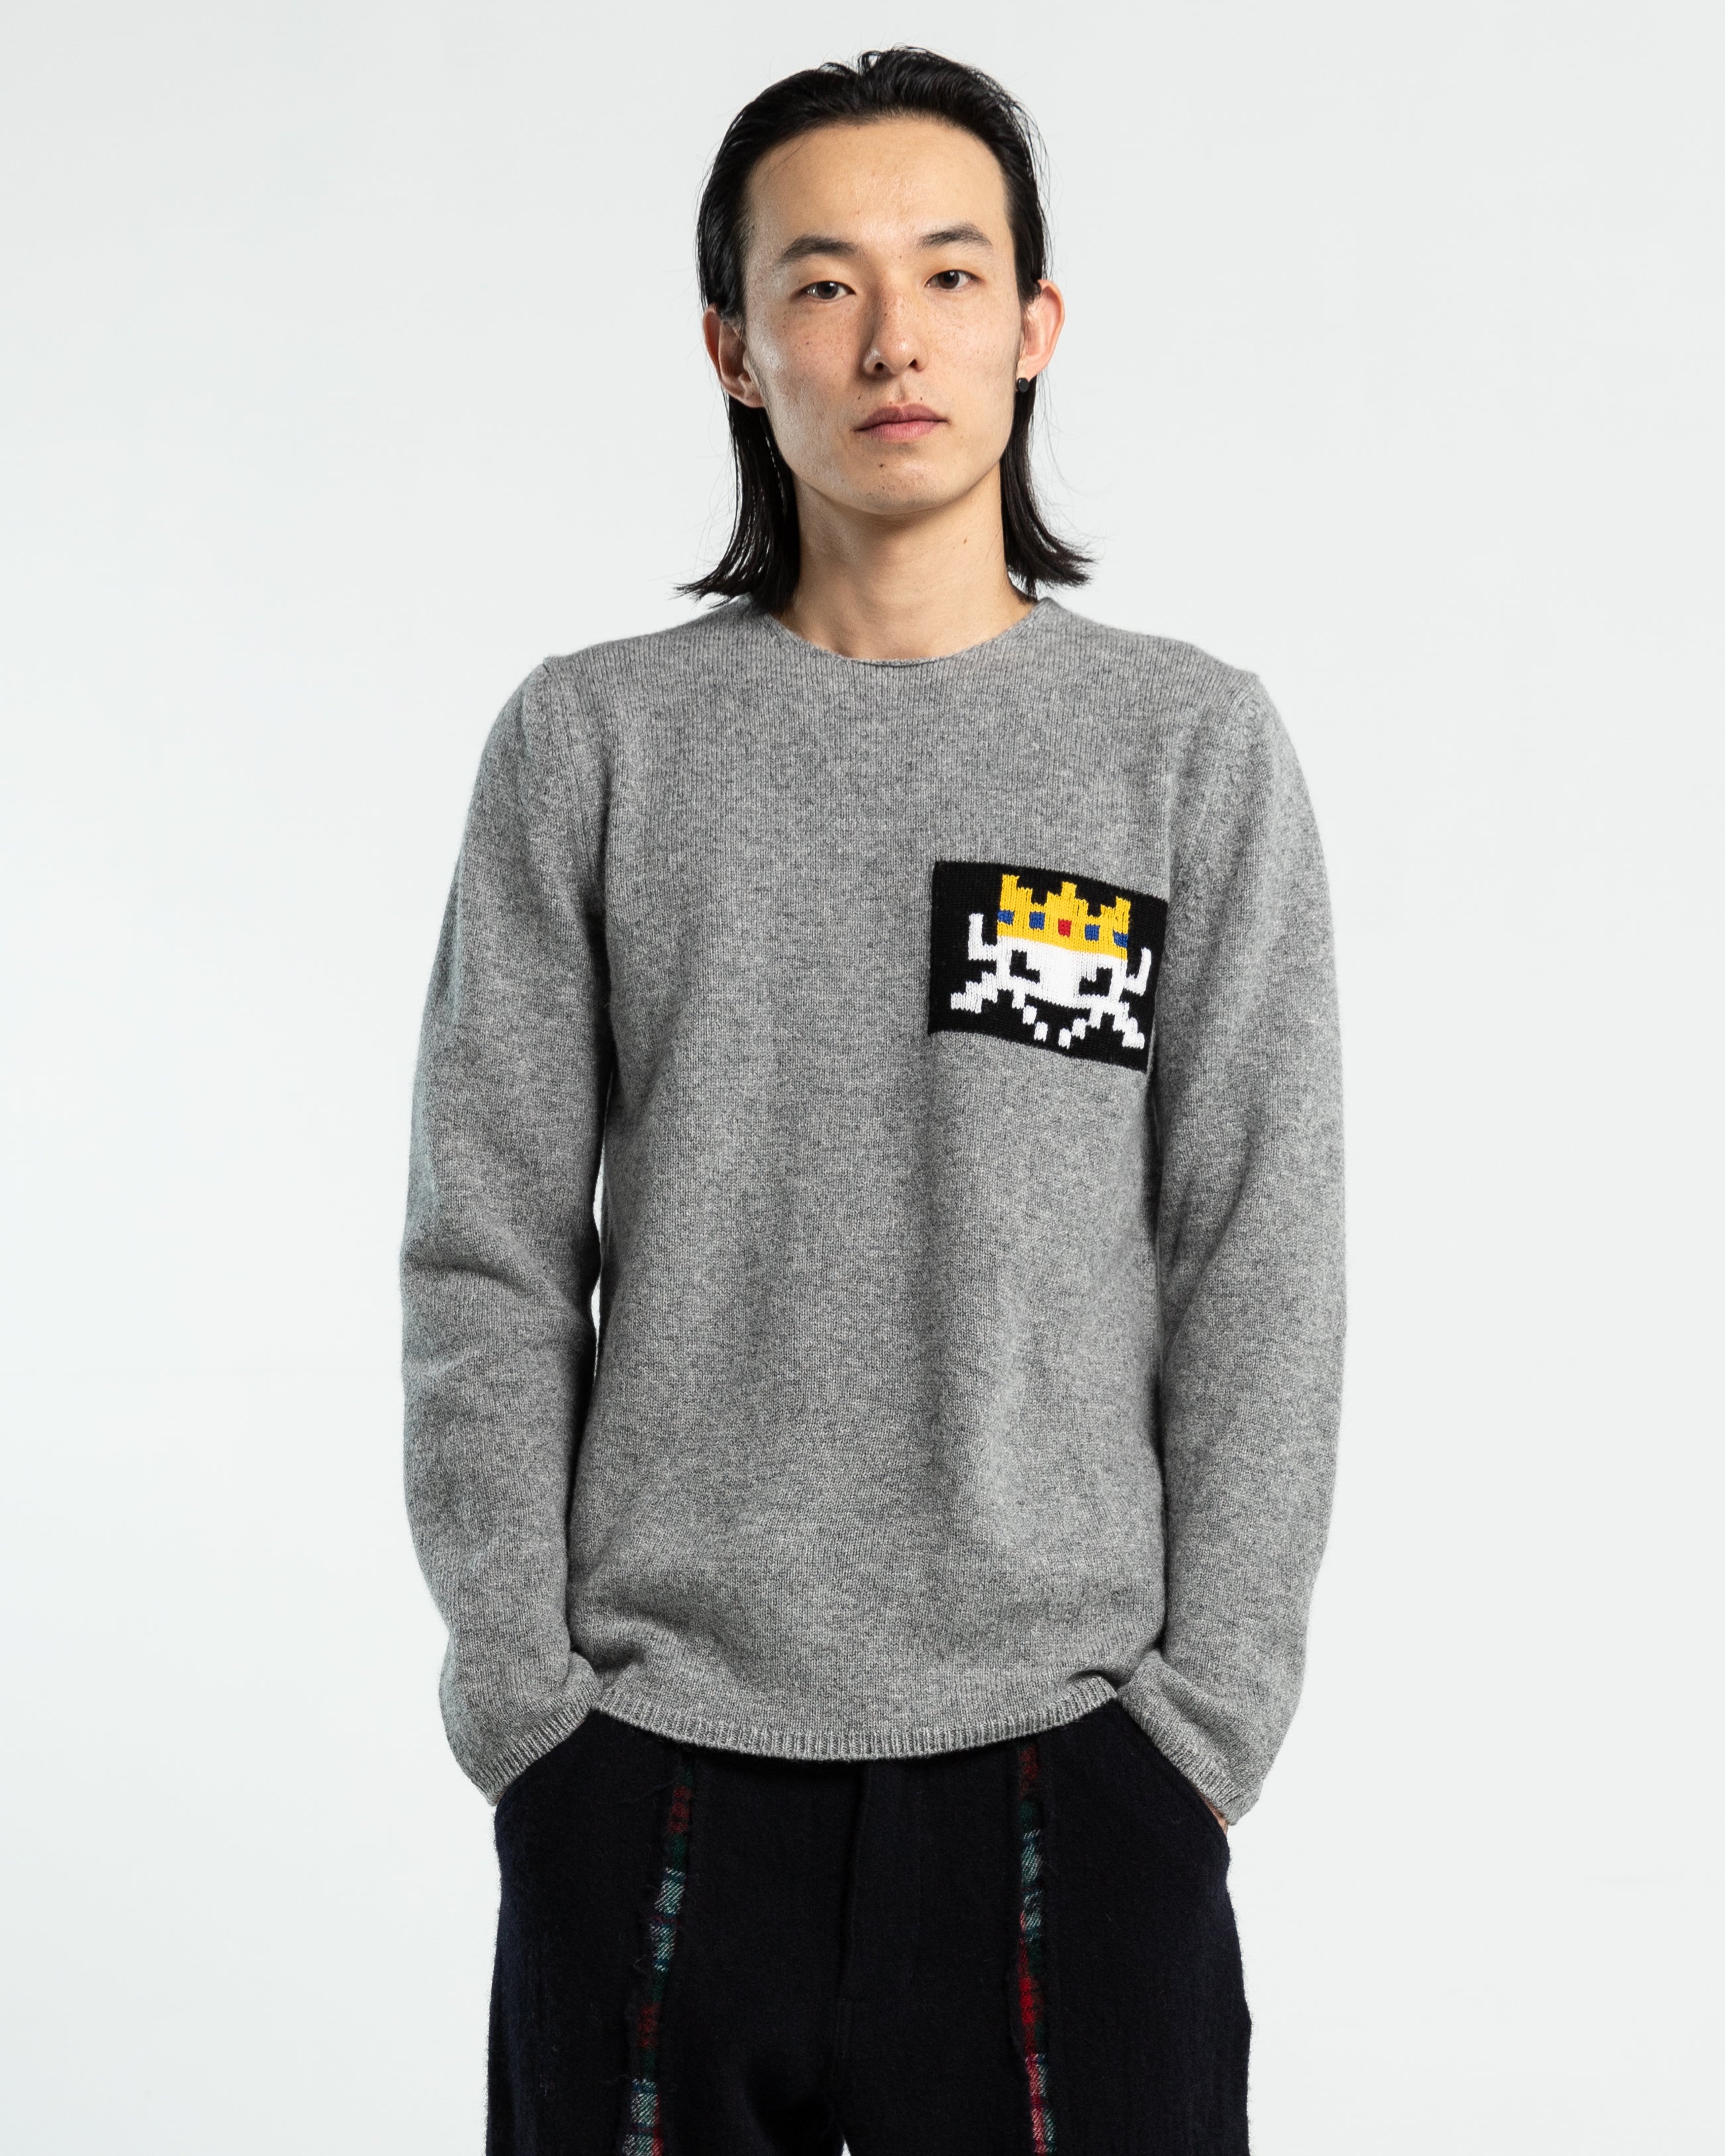 Knit Invader Sweater in Grey